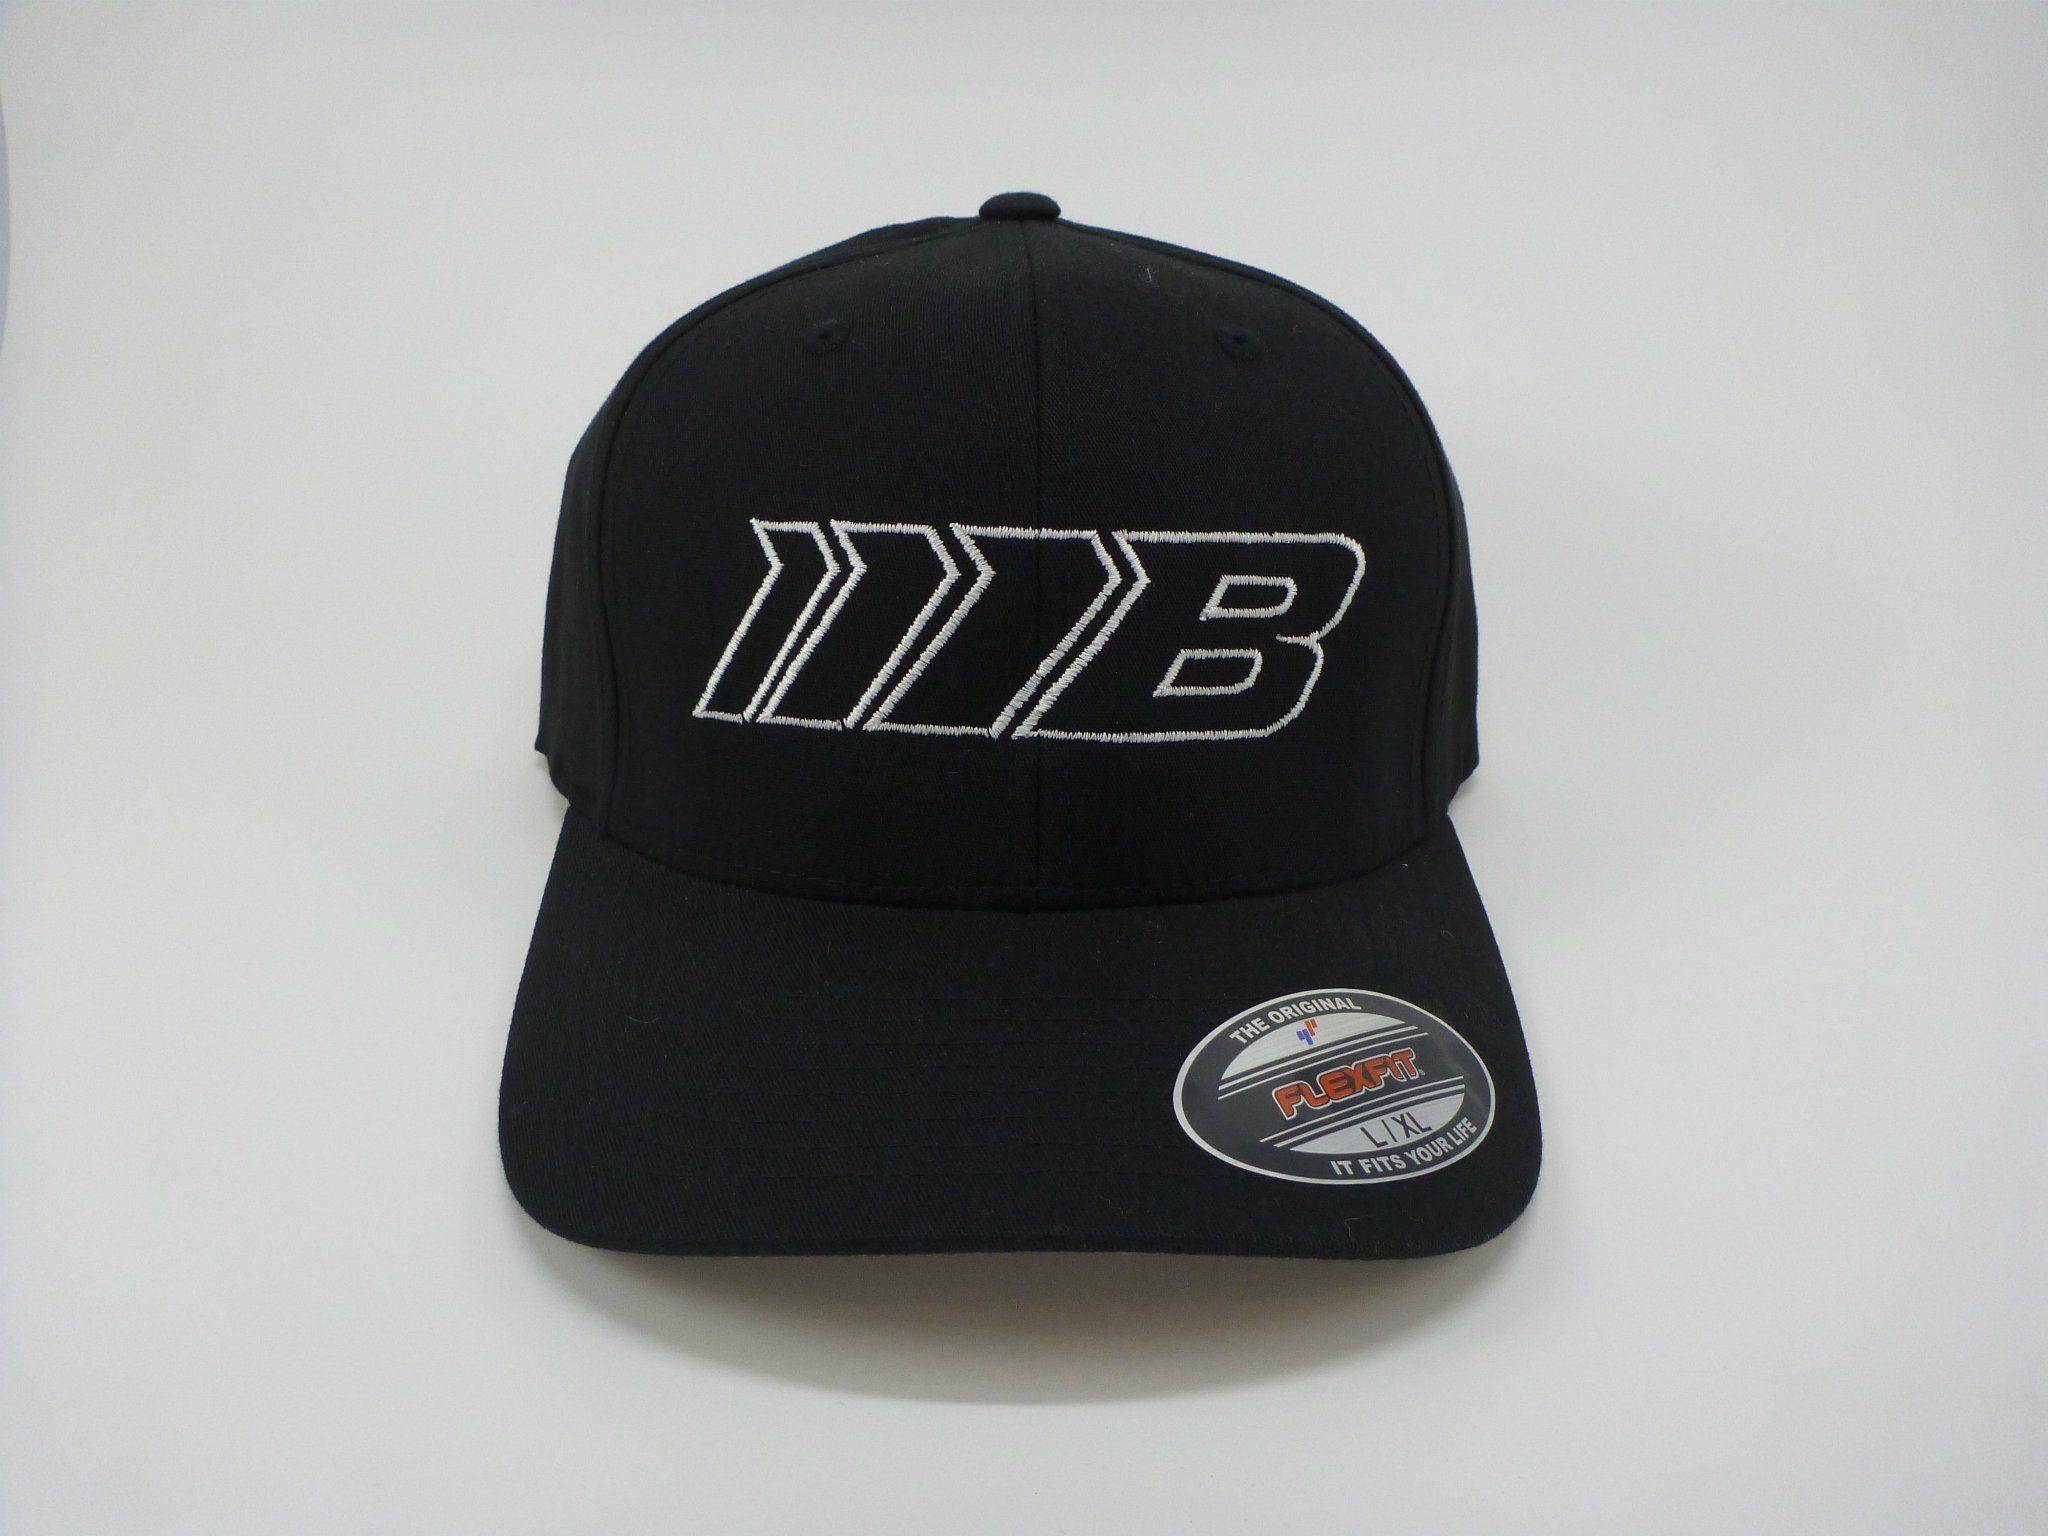 Green with White Outline Logo - Borg Motorsports Outline Logo Hat - Black with Green or White Logo